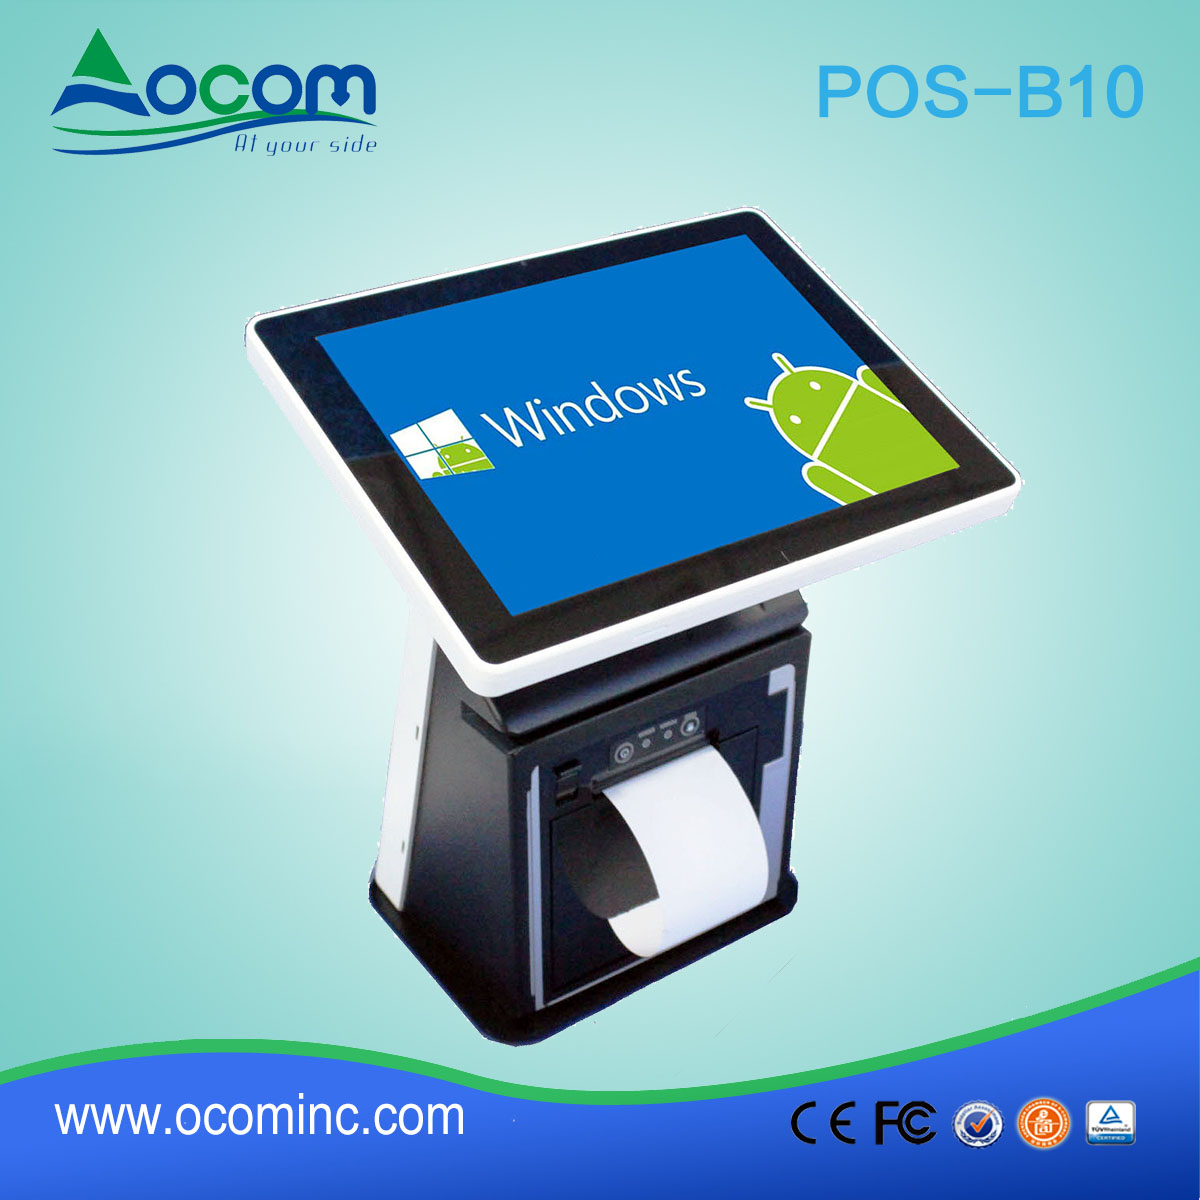 High quality 10" electronic cash register machine with embedded printer